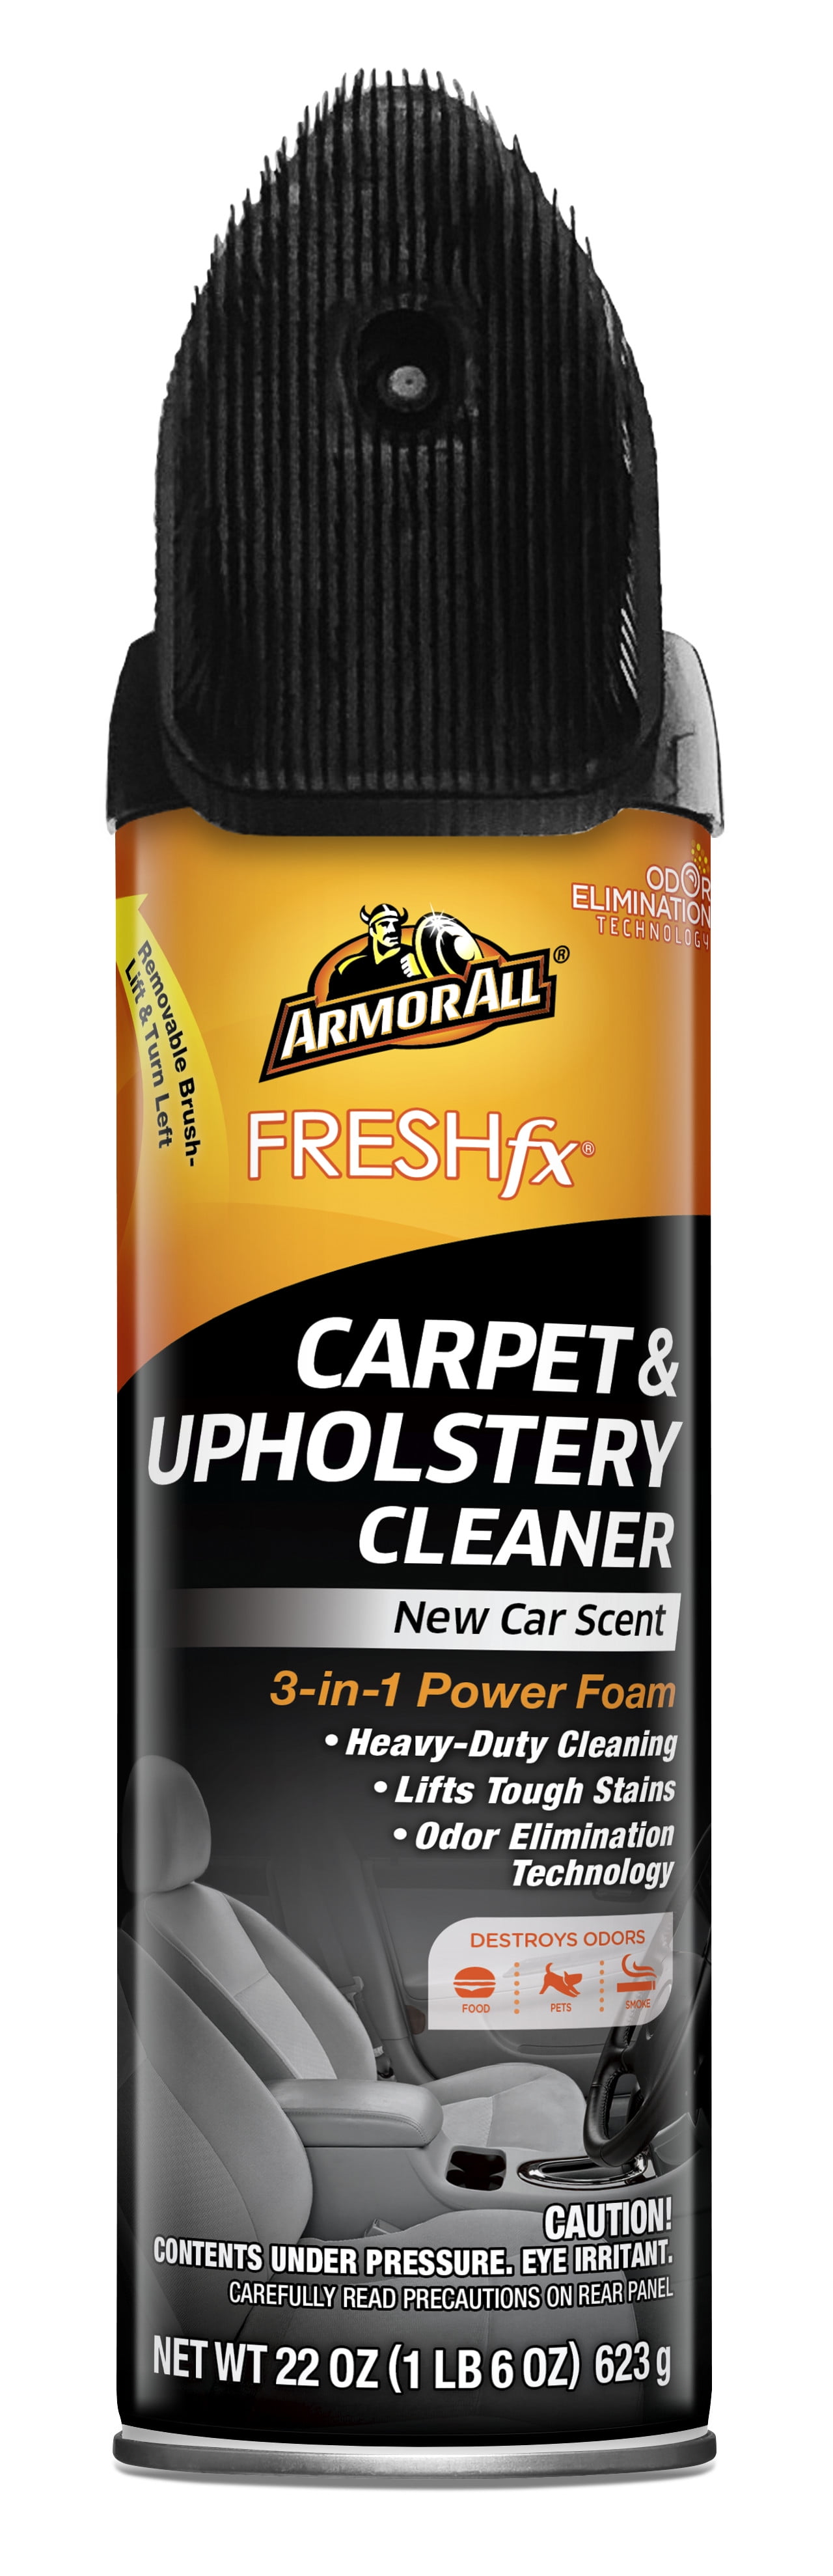 Armor All Carpet and Upholstery Cleaner 22oz 78091 for sale online